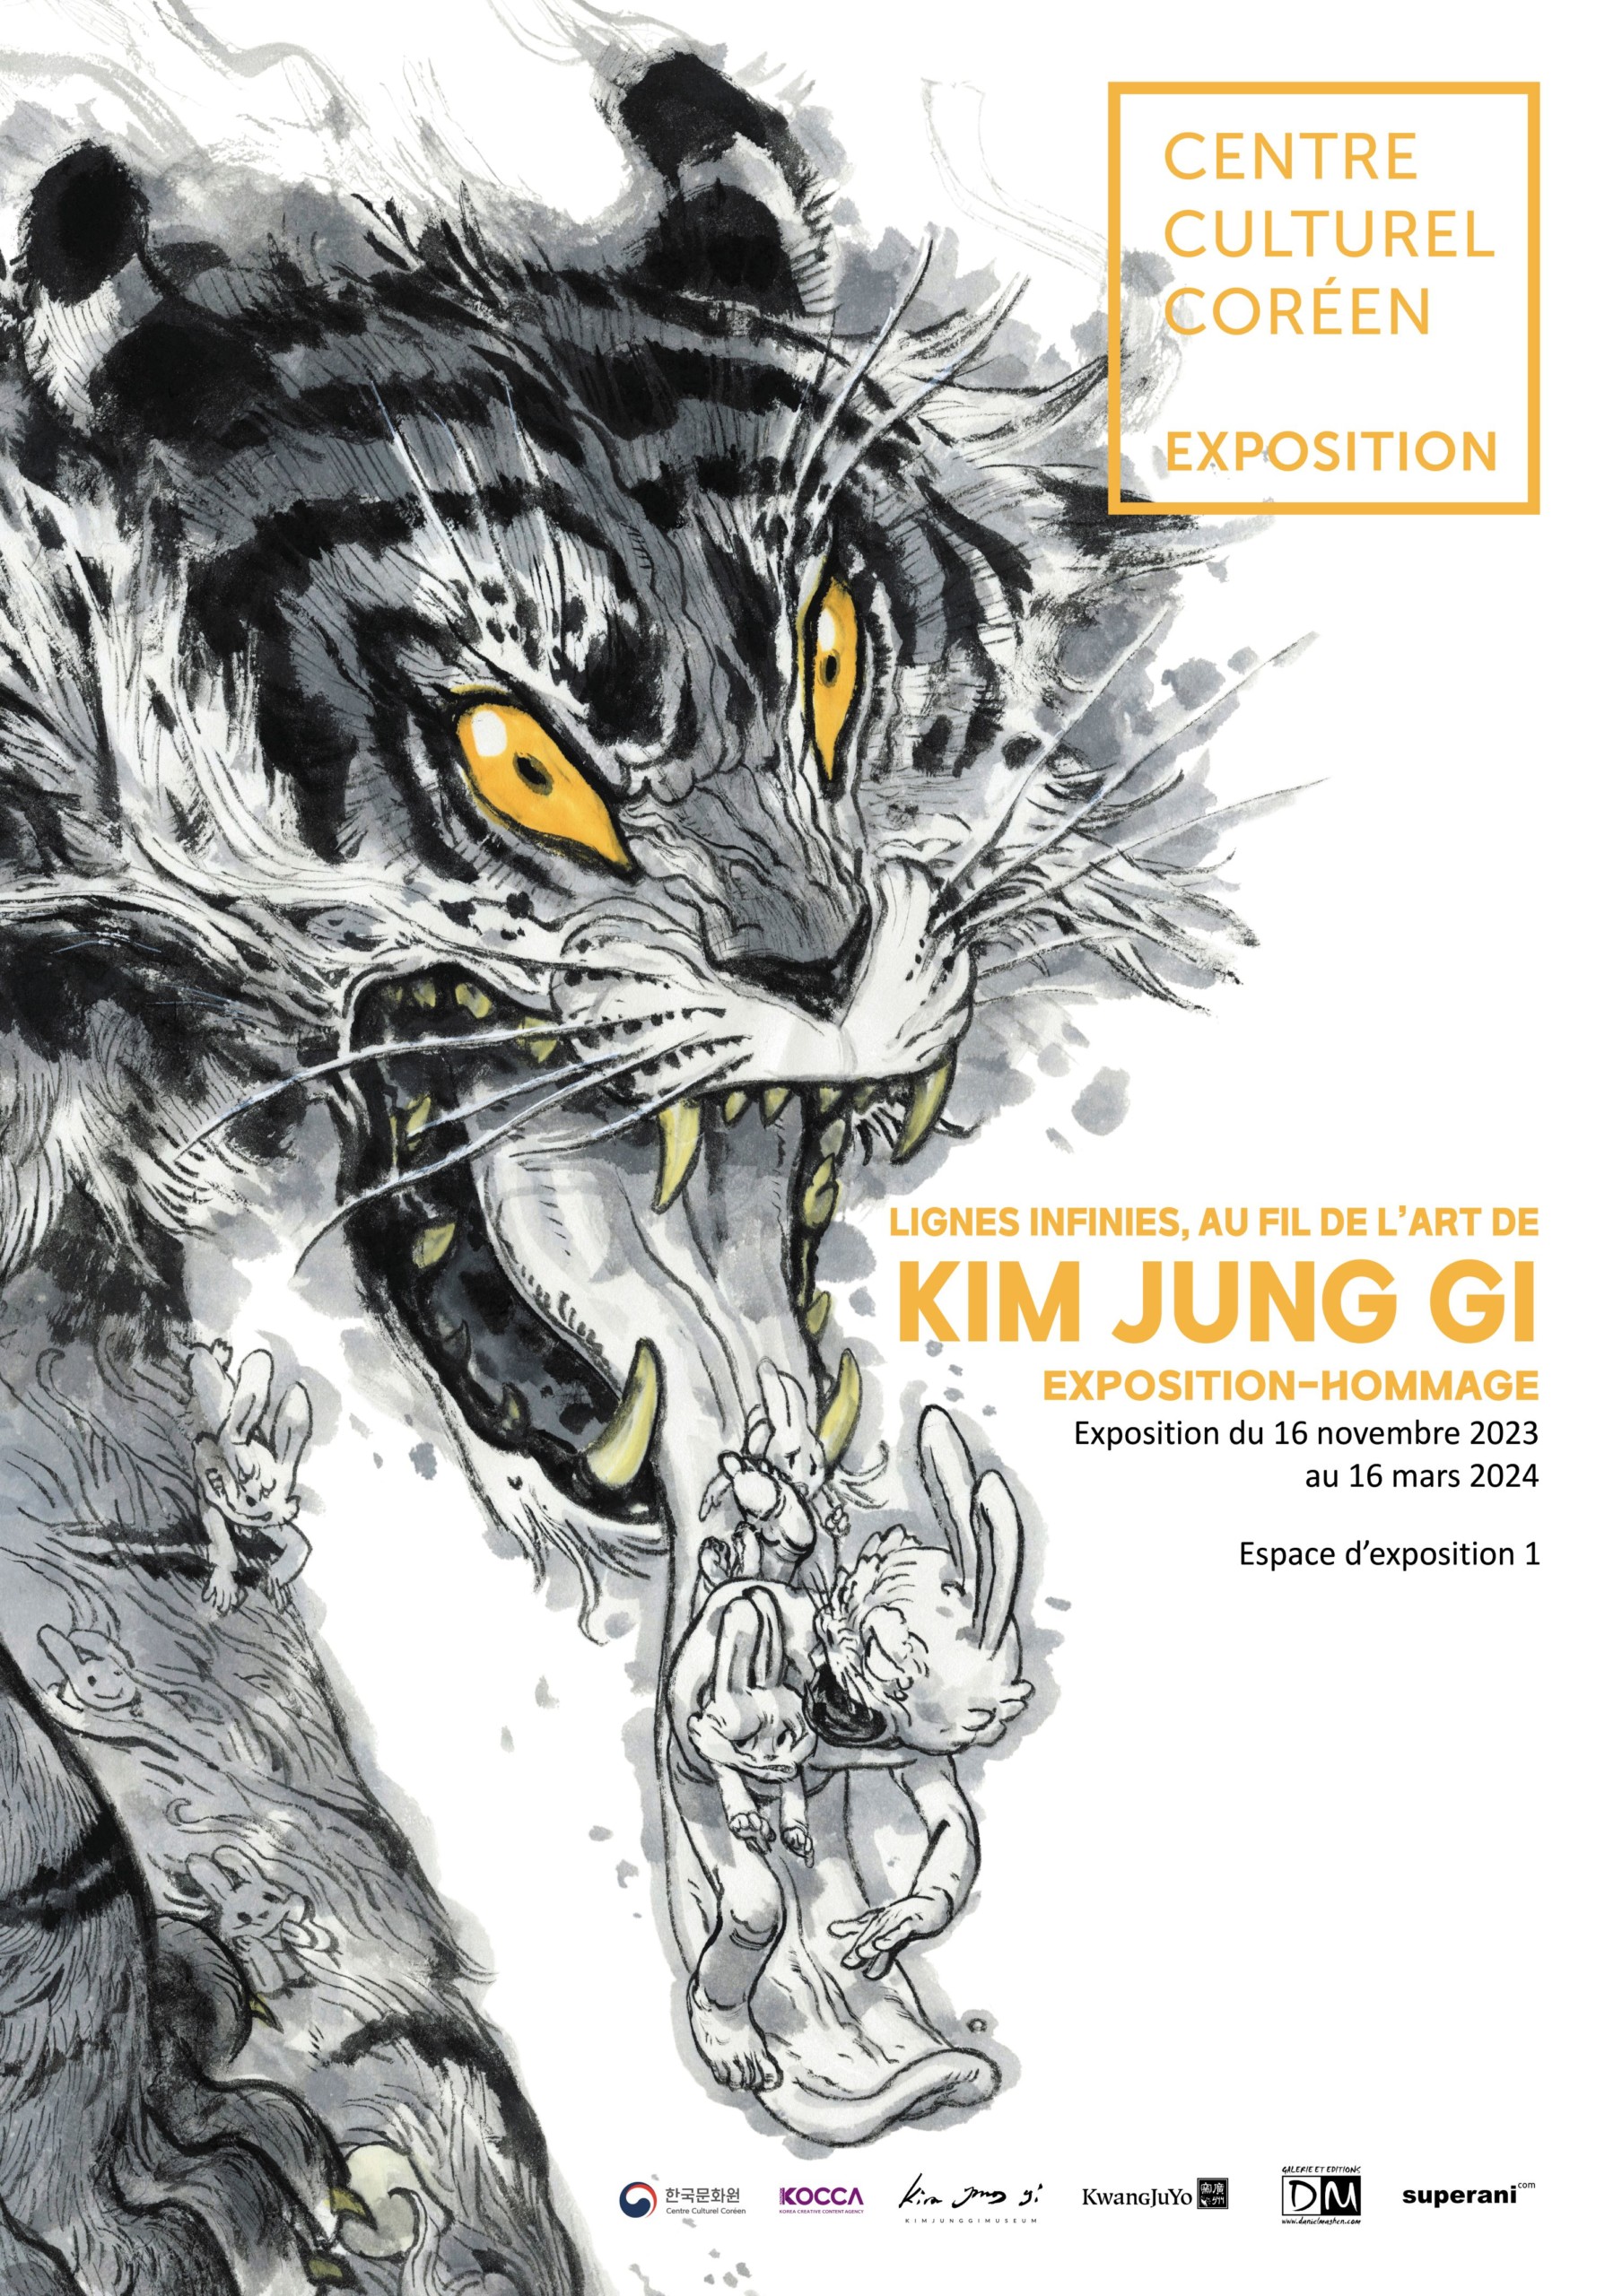 Exposition-hommage Kim Jung Gi